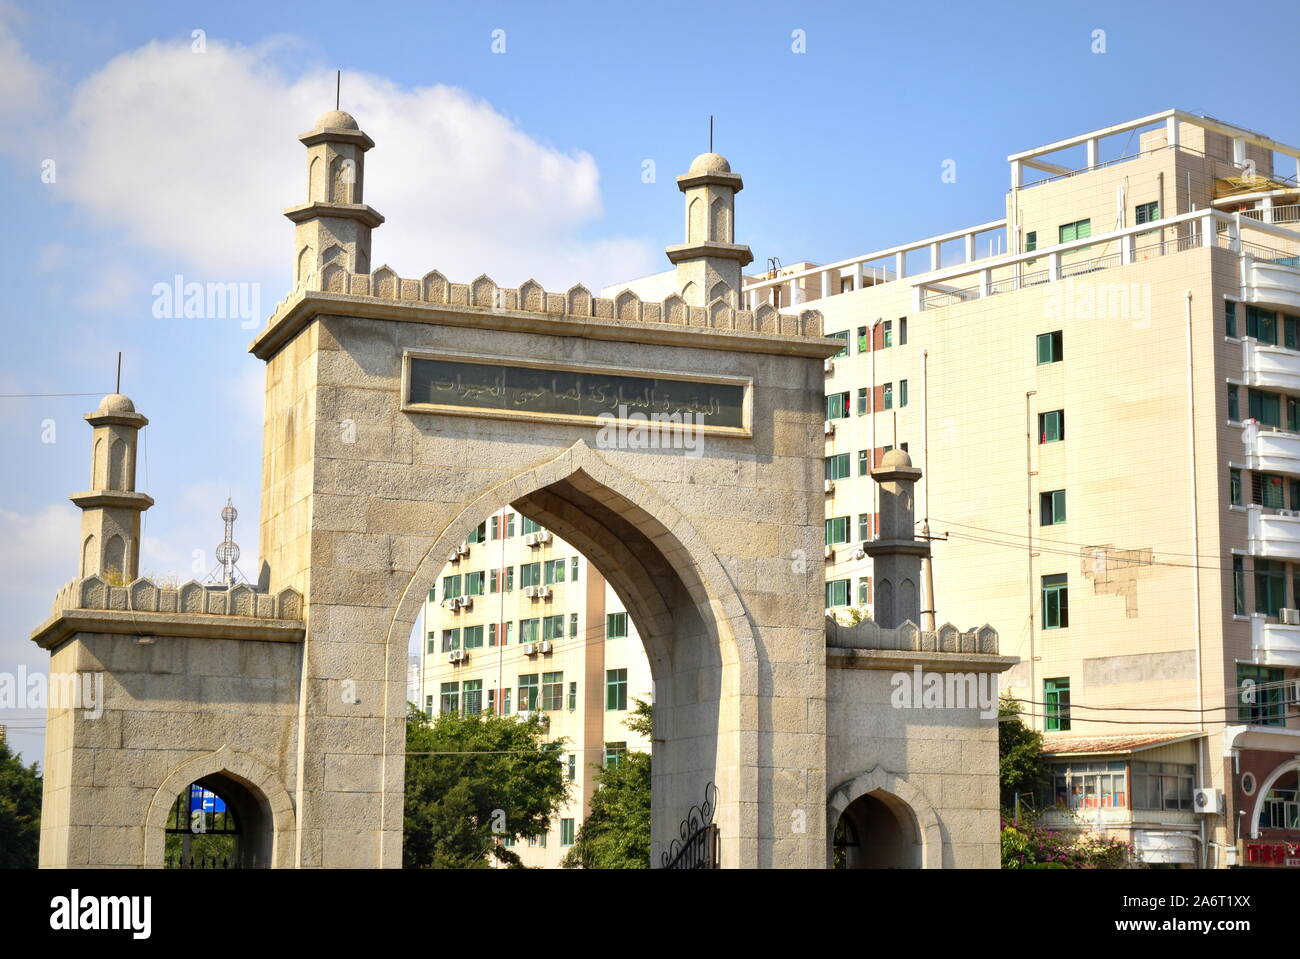 Islamic arch gate of ancient Muslim community in Quanzhou, China, the entrance gate to the Tang dynasty era tombs of companions of Prophet Mohammad an Stock Photo